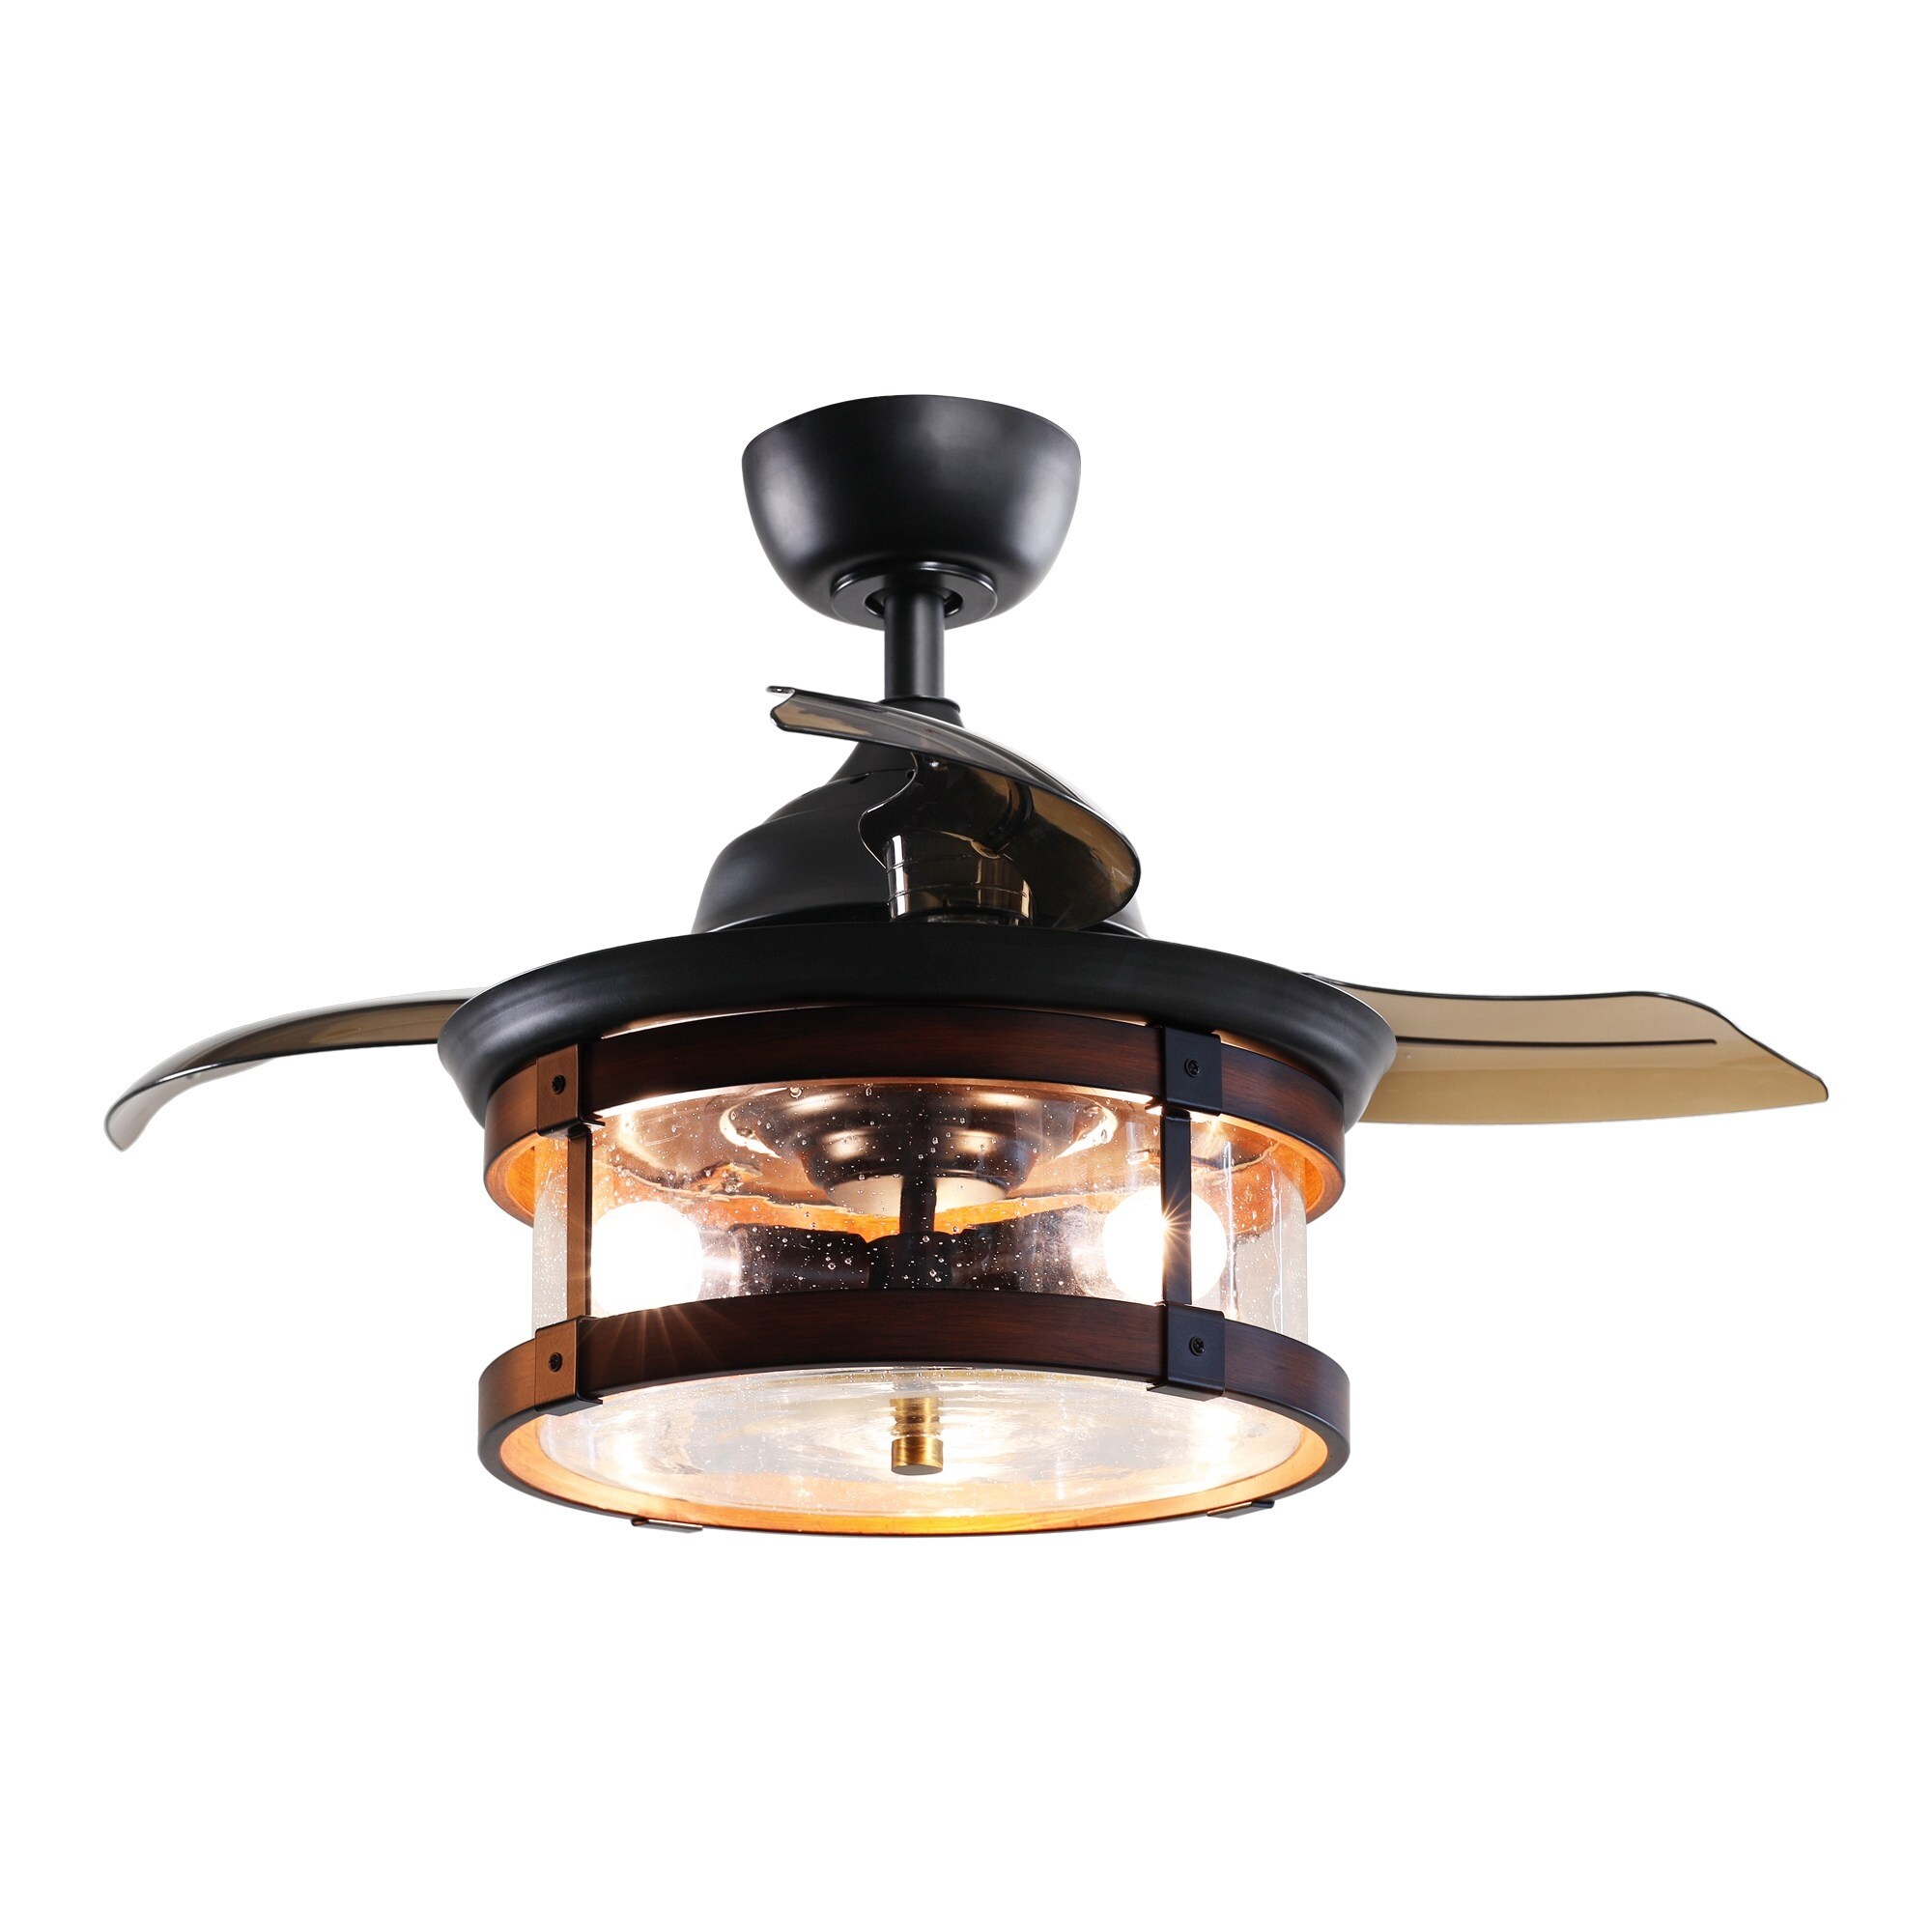 36" Industrial Retractable 3-Blade Ceiling Fan Chandelier with Remote - 36-in